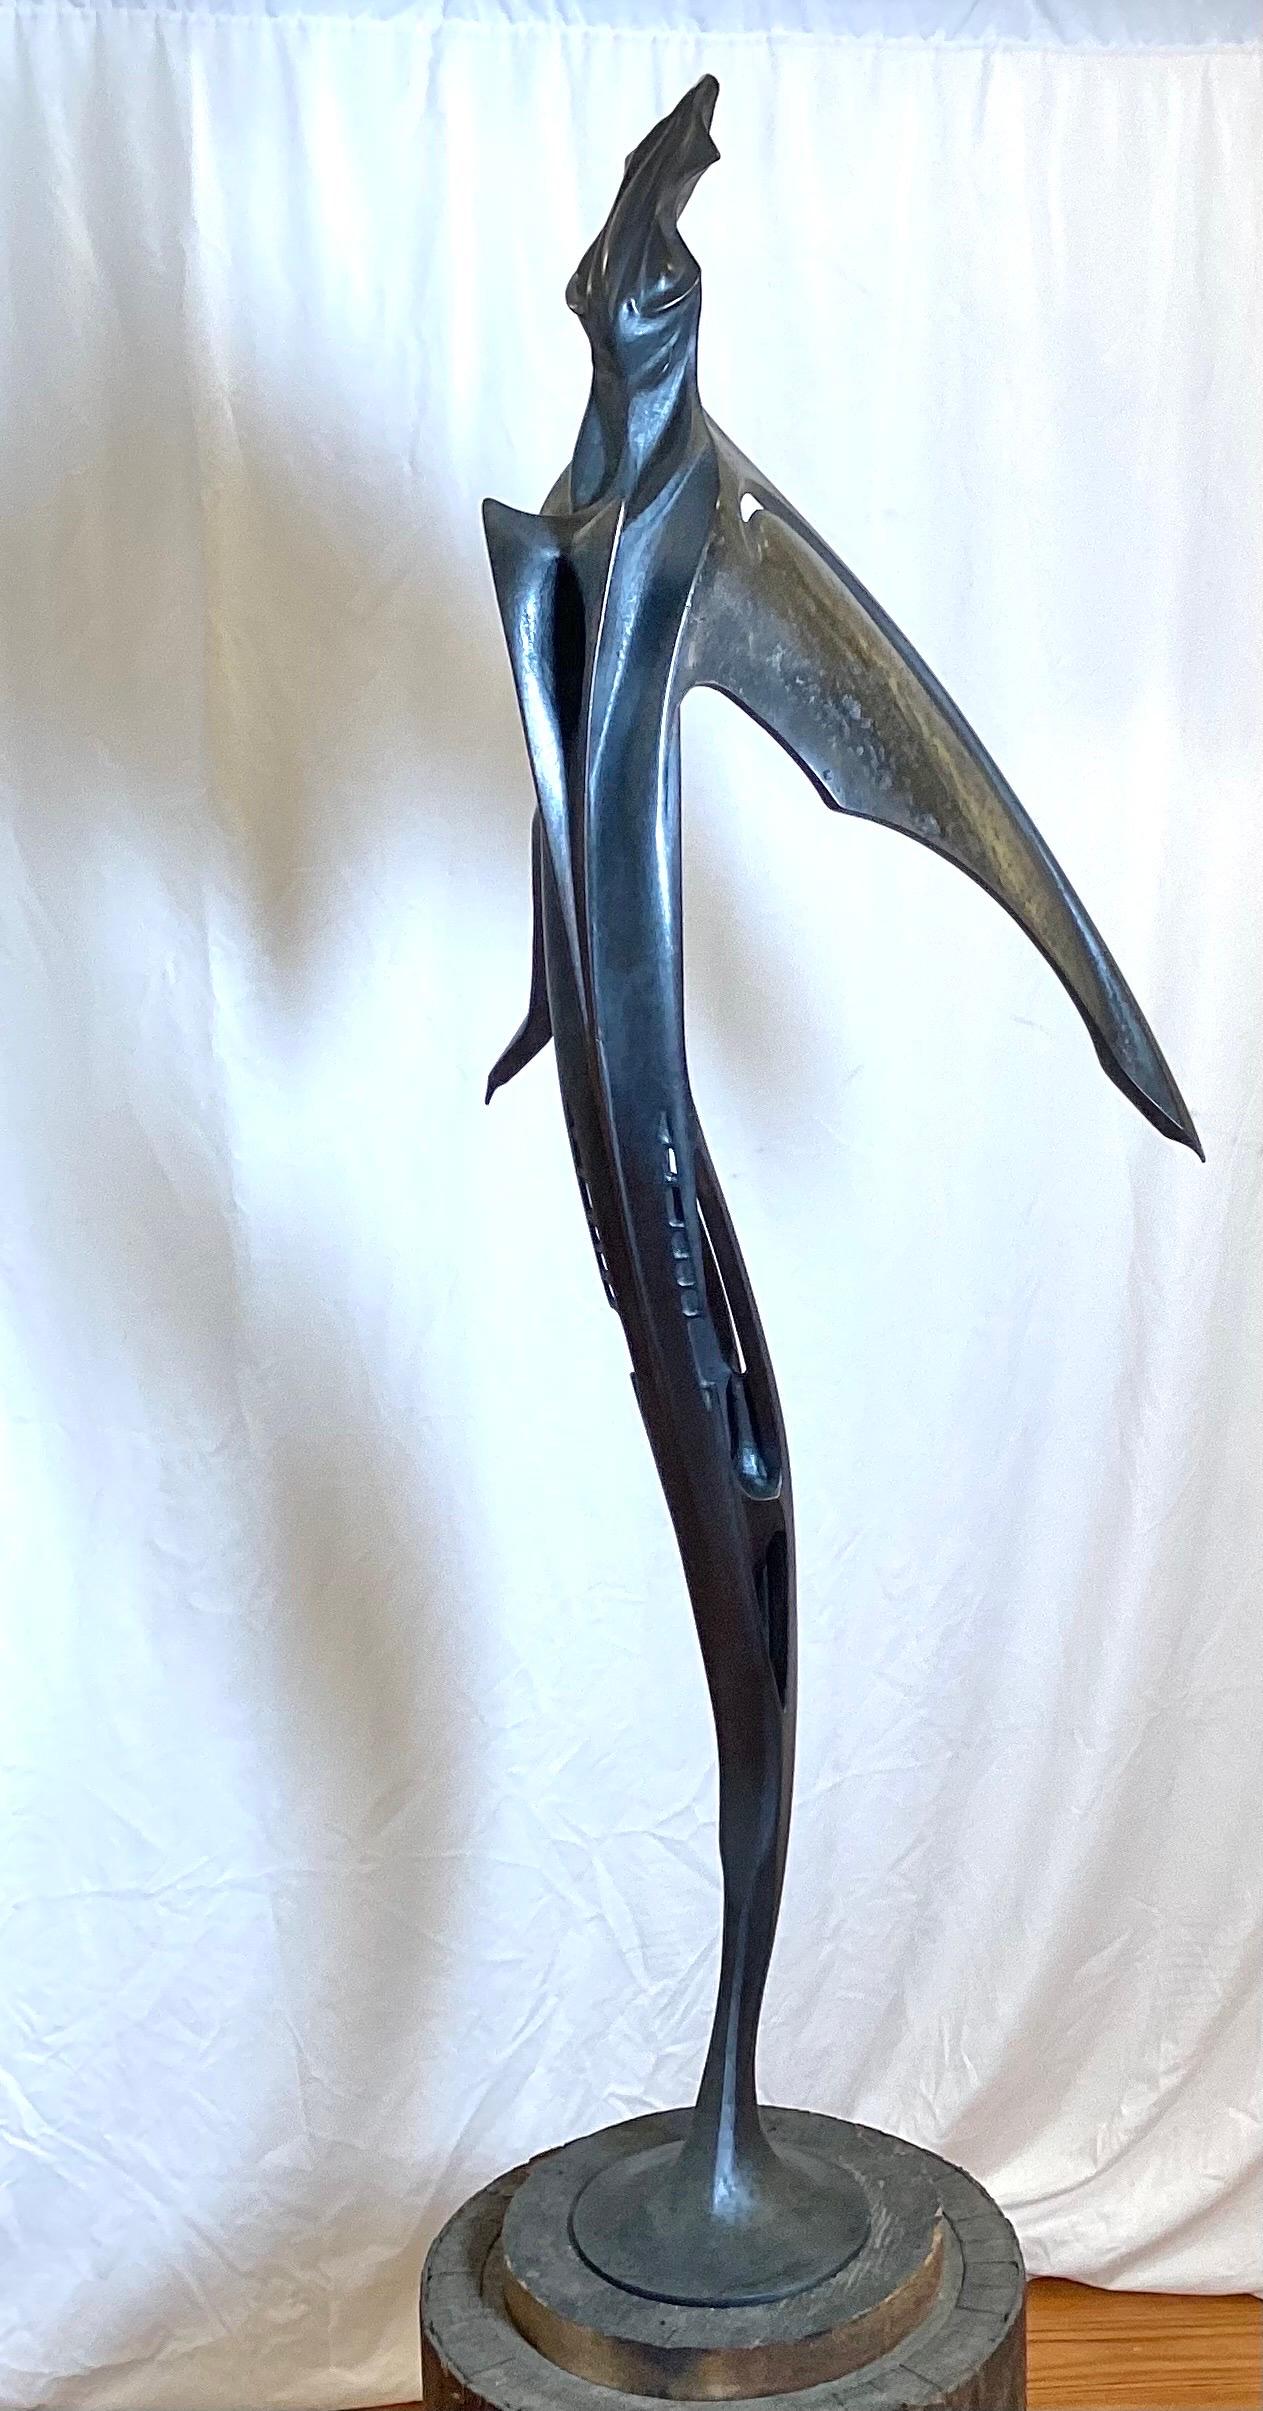 Tis is a one of a kind tall, slender sculpture in patinated bronze by Lawrence Welker IV.  It rotates on the base to allow it to be viewed from all sides.  51 Inches Tall, Signed near the base. 

Lawrence Welker IV was  raised  in the creative and